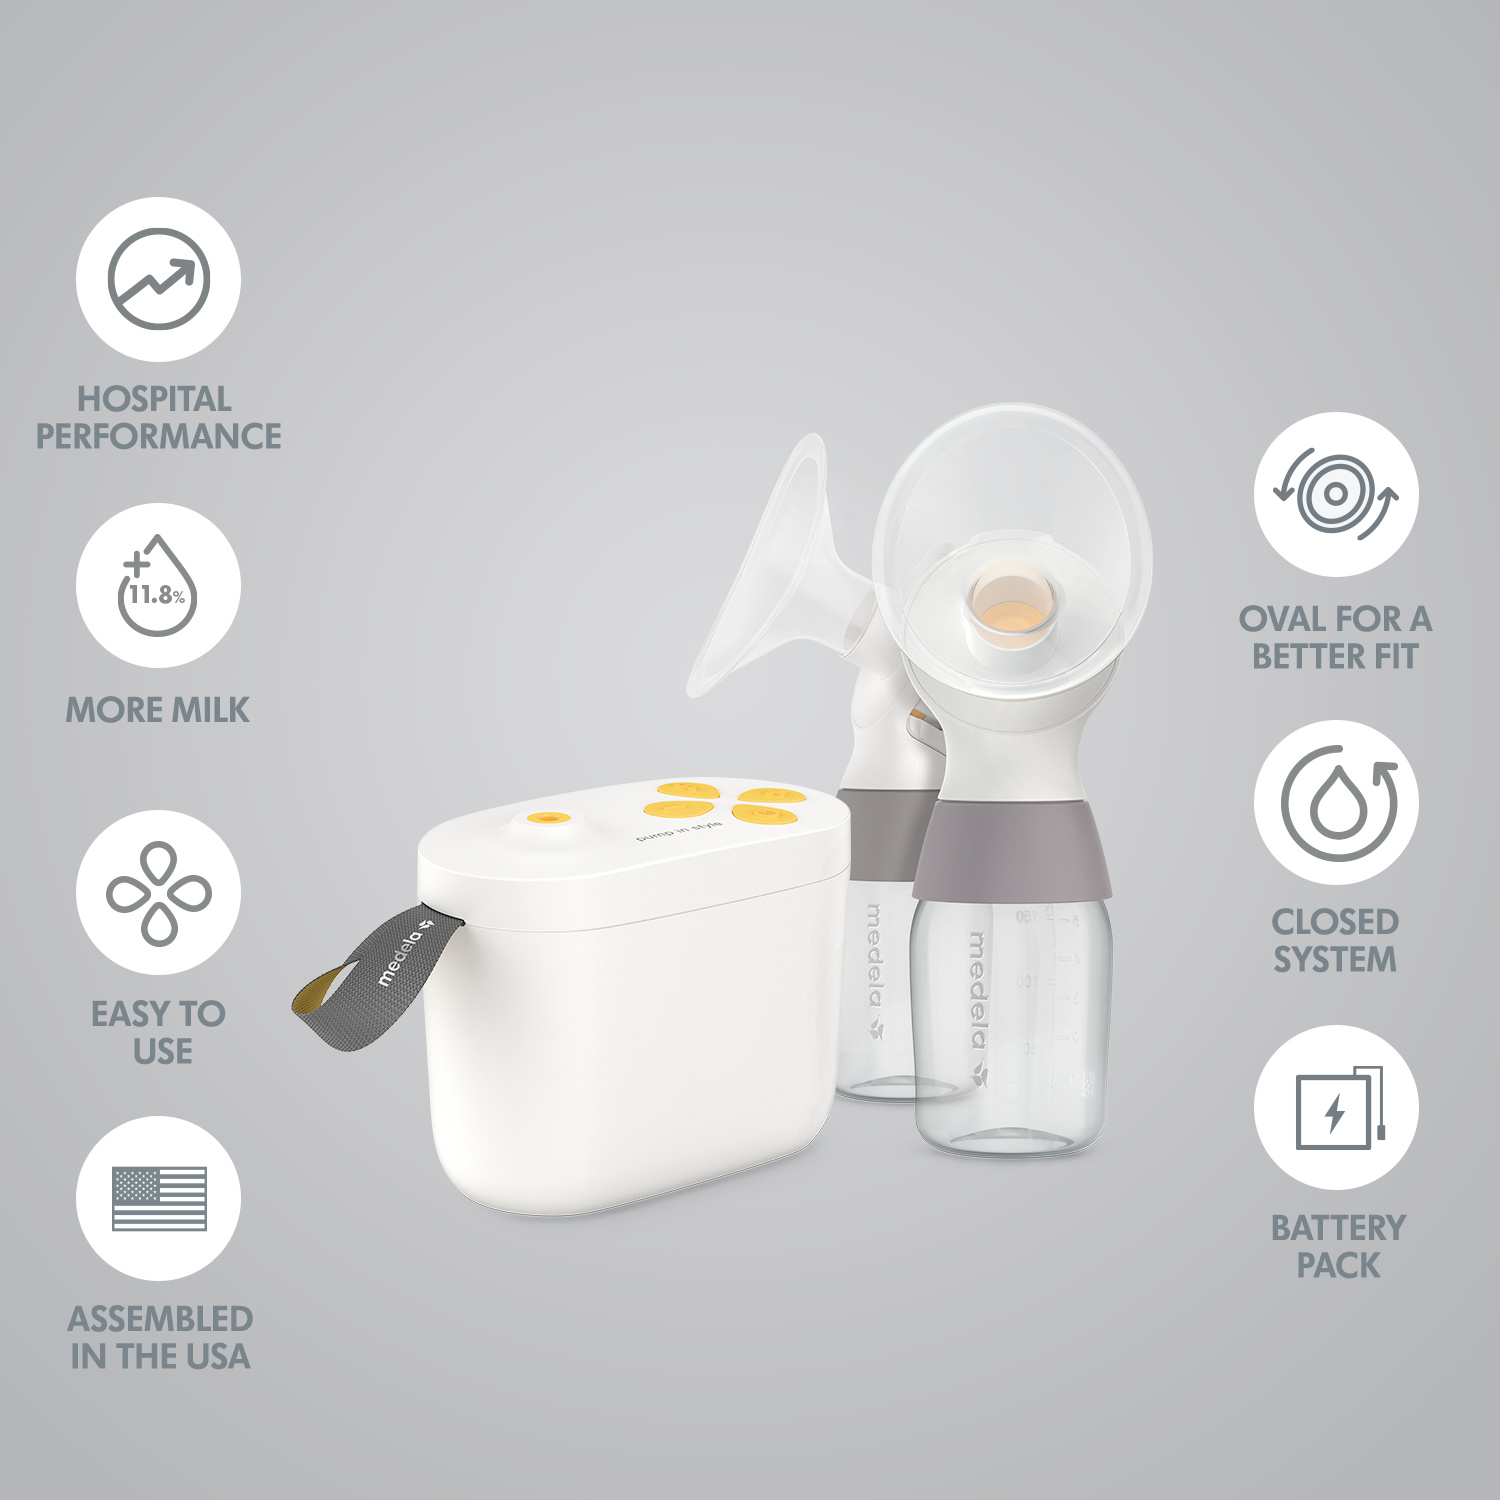 Medela Pump In Style with MaxFlow™ Insurance Set - Breast Pumps